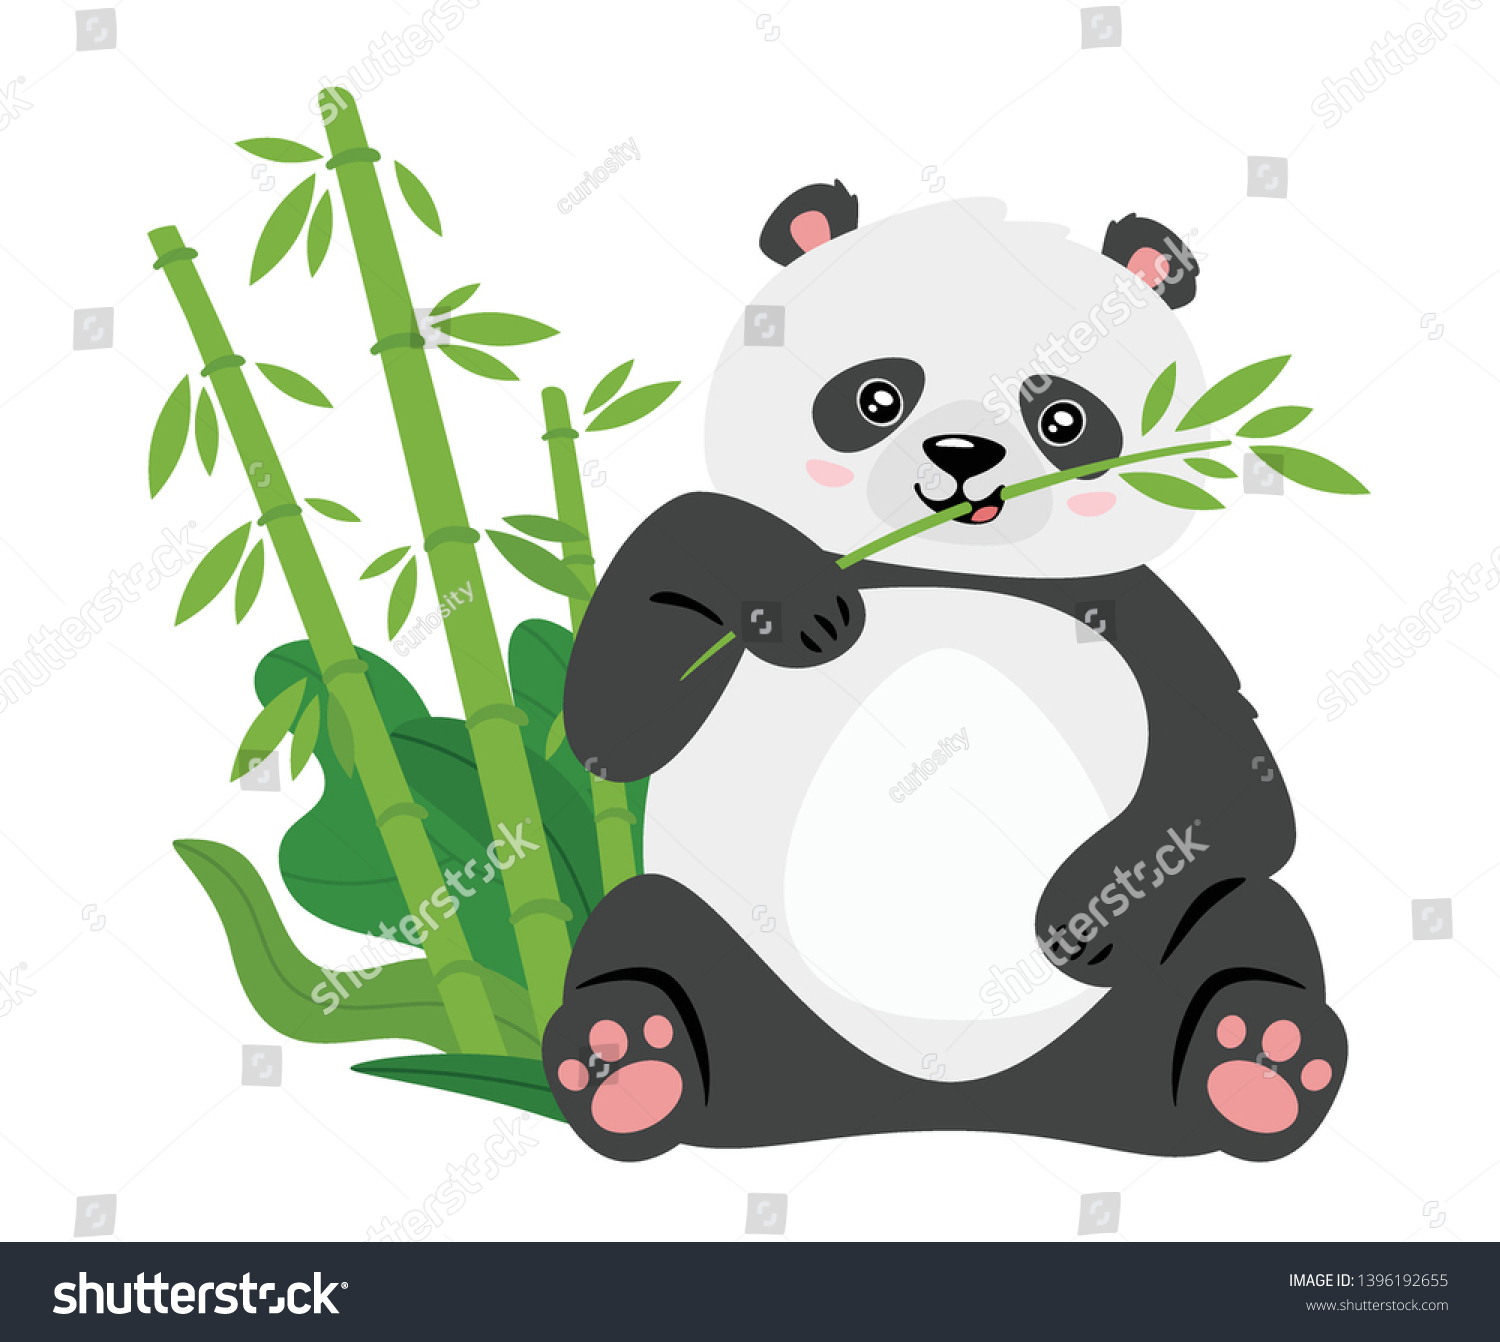 SVG of Cute panda eating bamboo stems flat vector illustration. Asian rainforest adorable bear isolated design element. Jungle wildlife, zoo lazy animal. Wild mammal cartoon character smiling svg